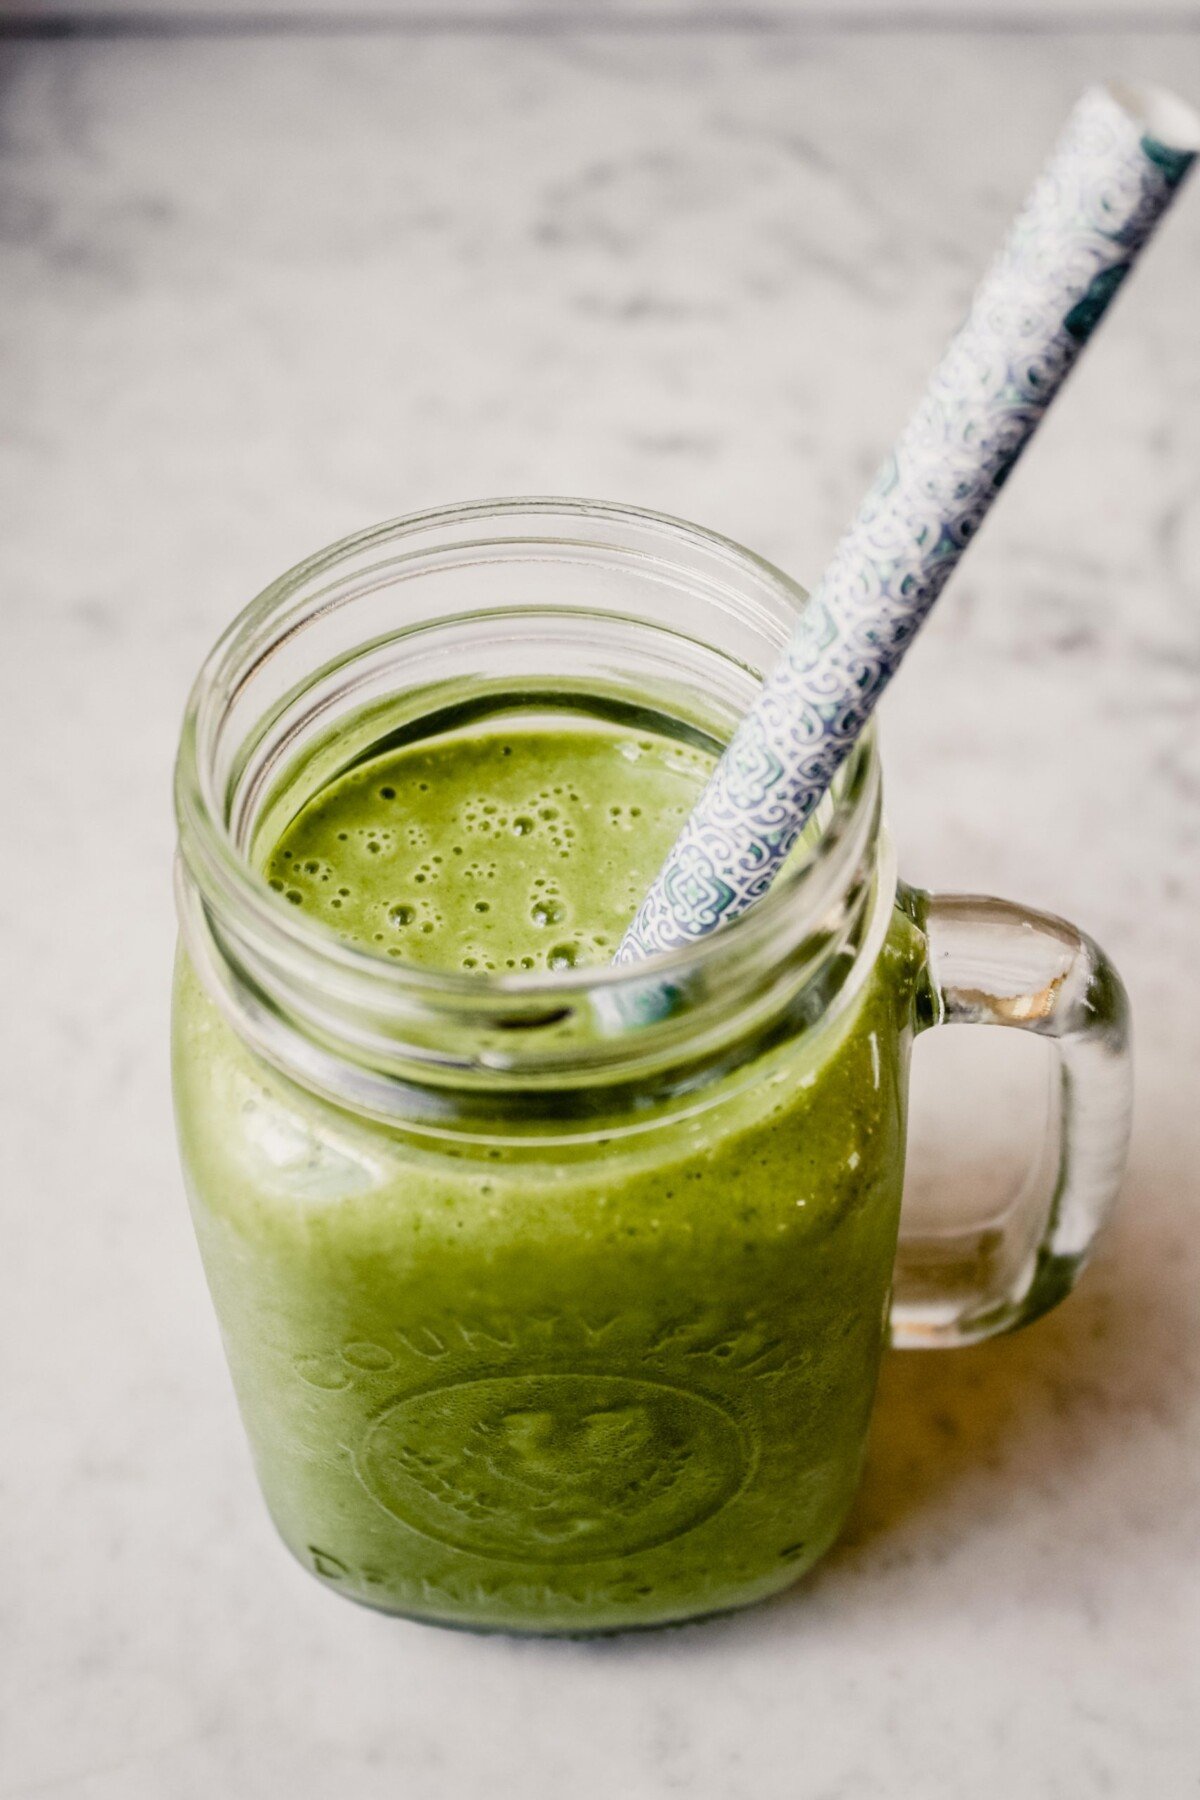 Photograph of a green kale smoothie in a glass Ball jar with a blue straw